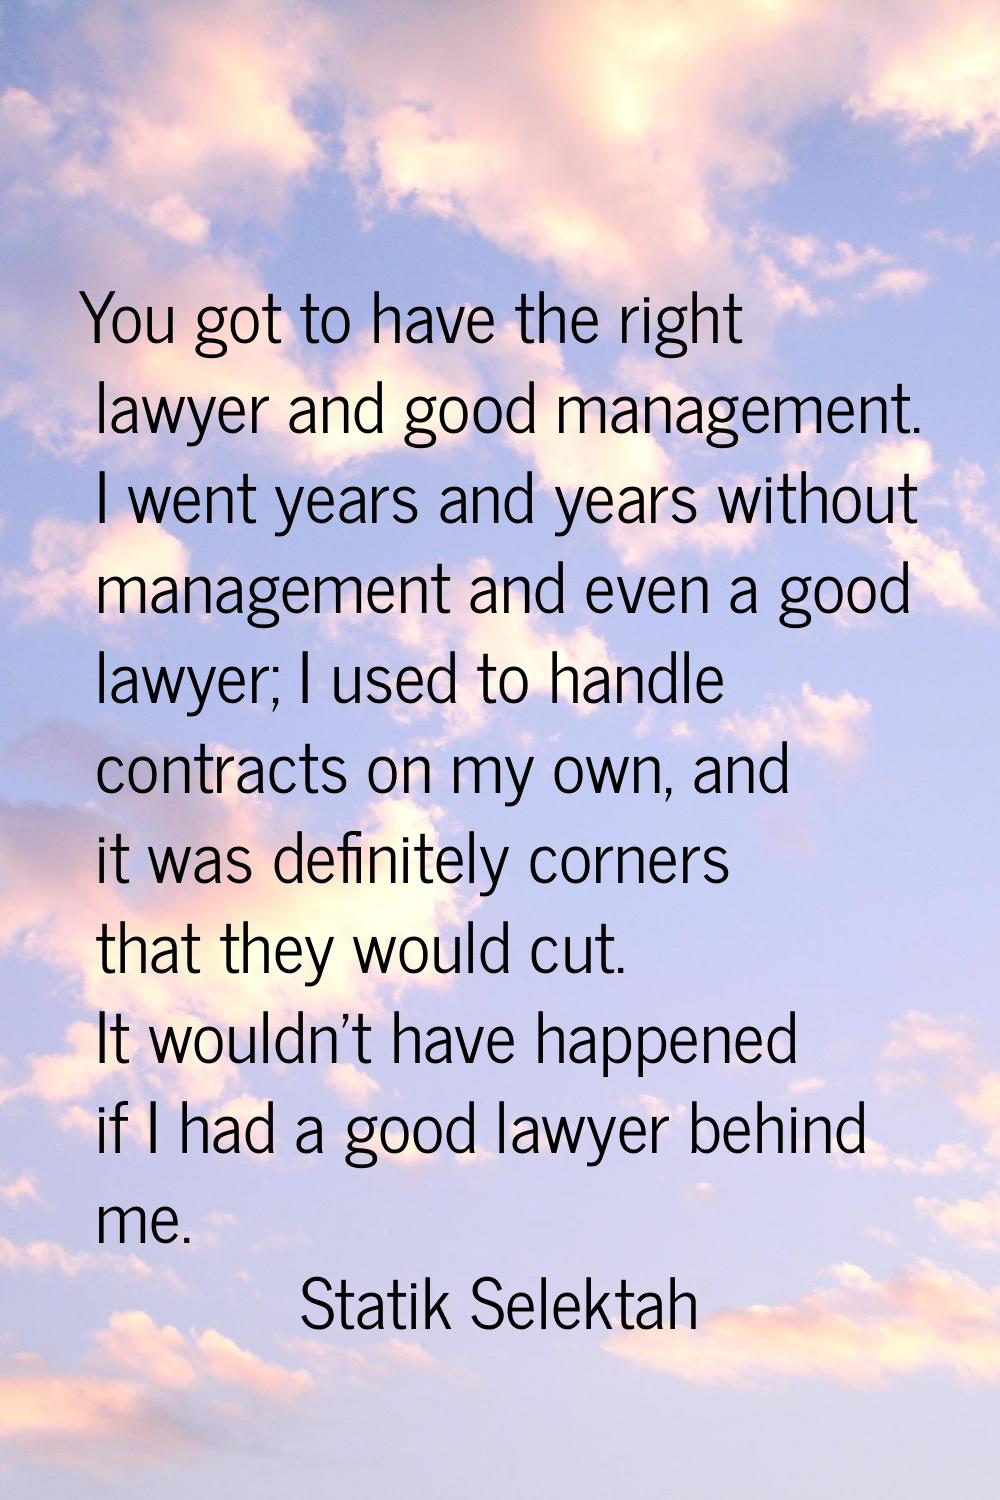 You got to have the right lawyer and good management. I went years and years without management and